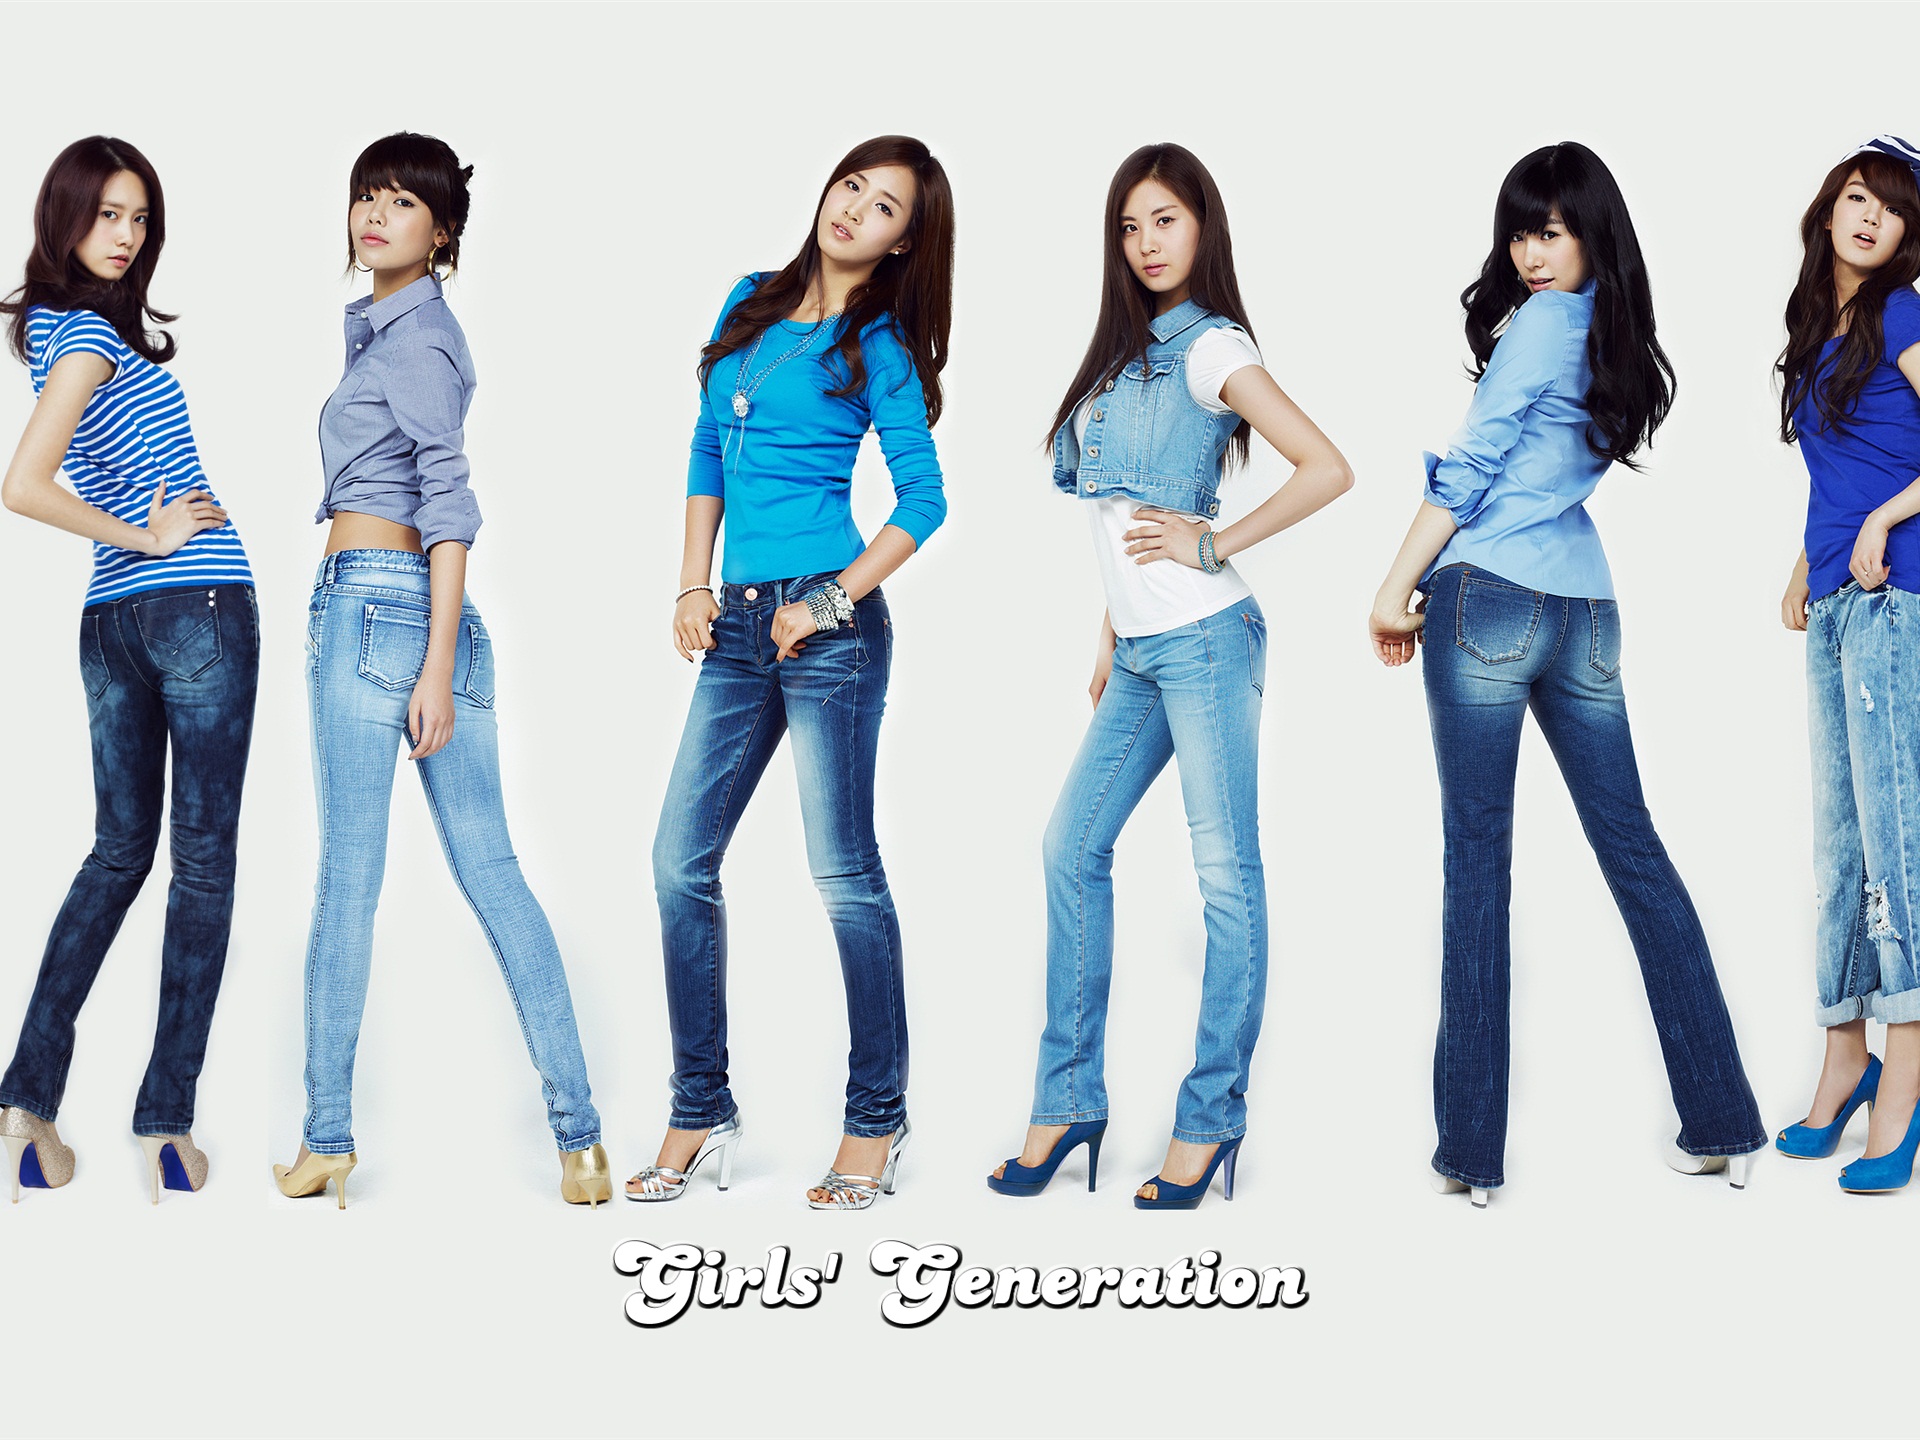 Girls Generation latest HD wallpapers collection #22 - 1920x1440